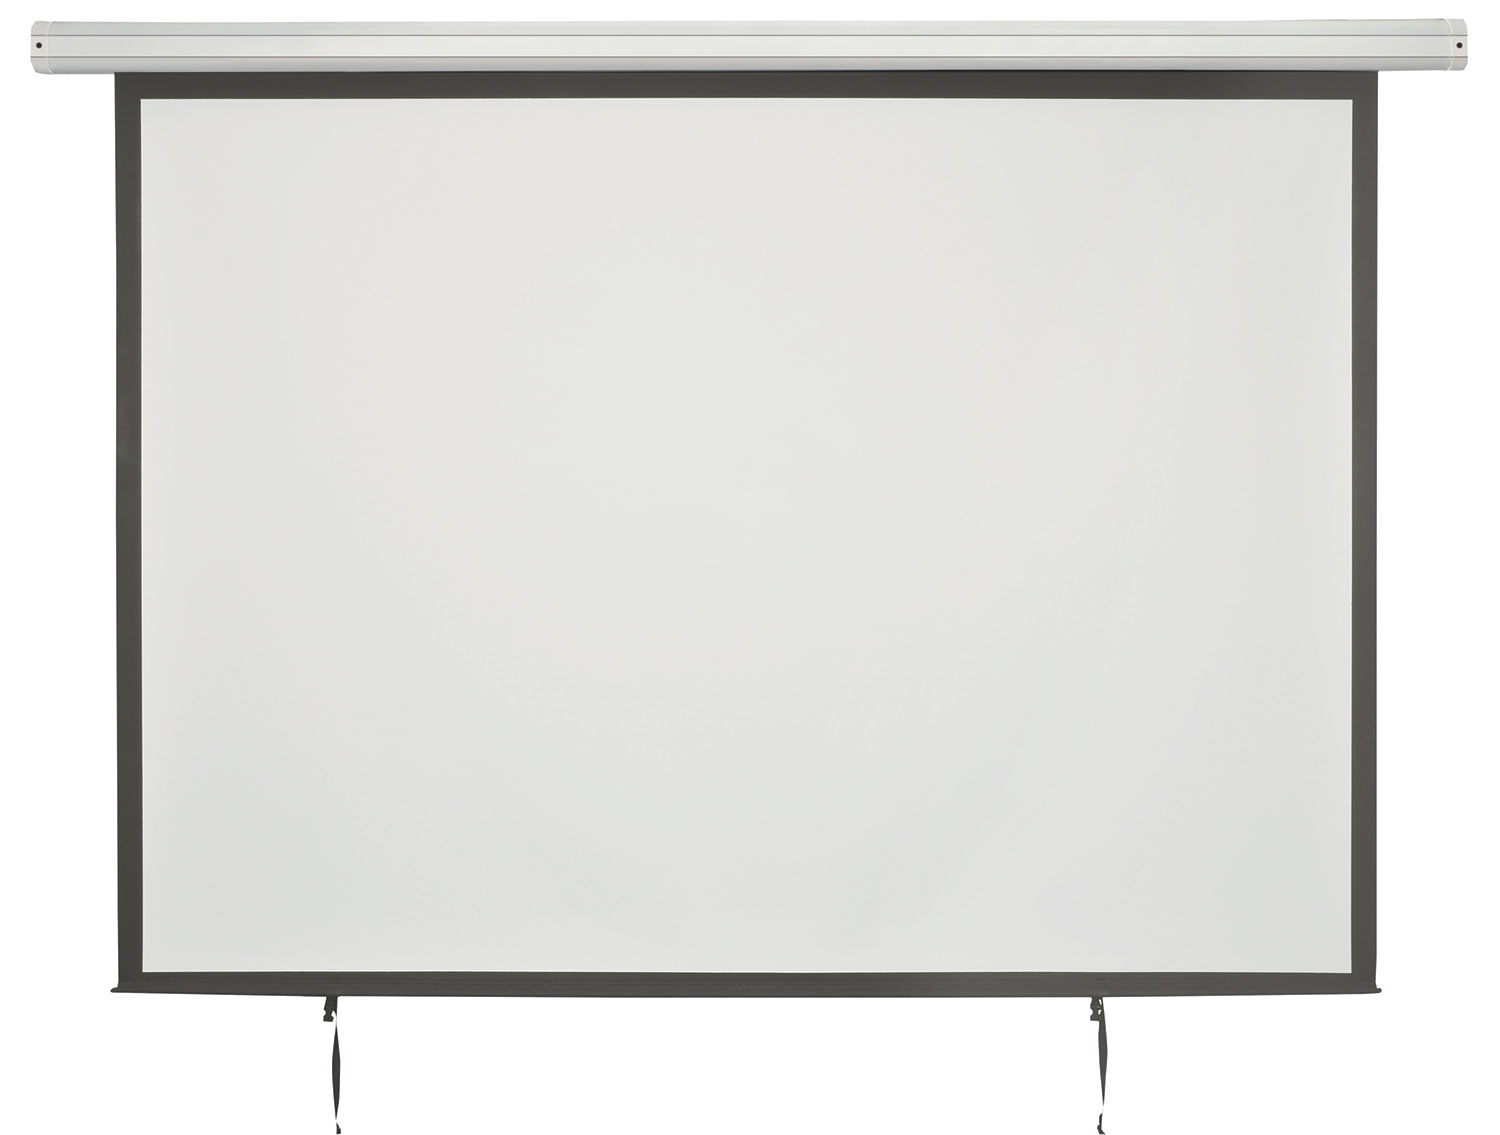 Electric Projector Screens 120" 4:3 Electric Motorised Projector Screen